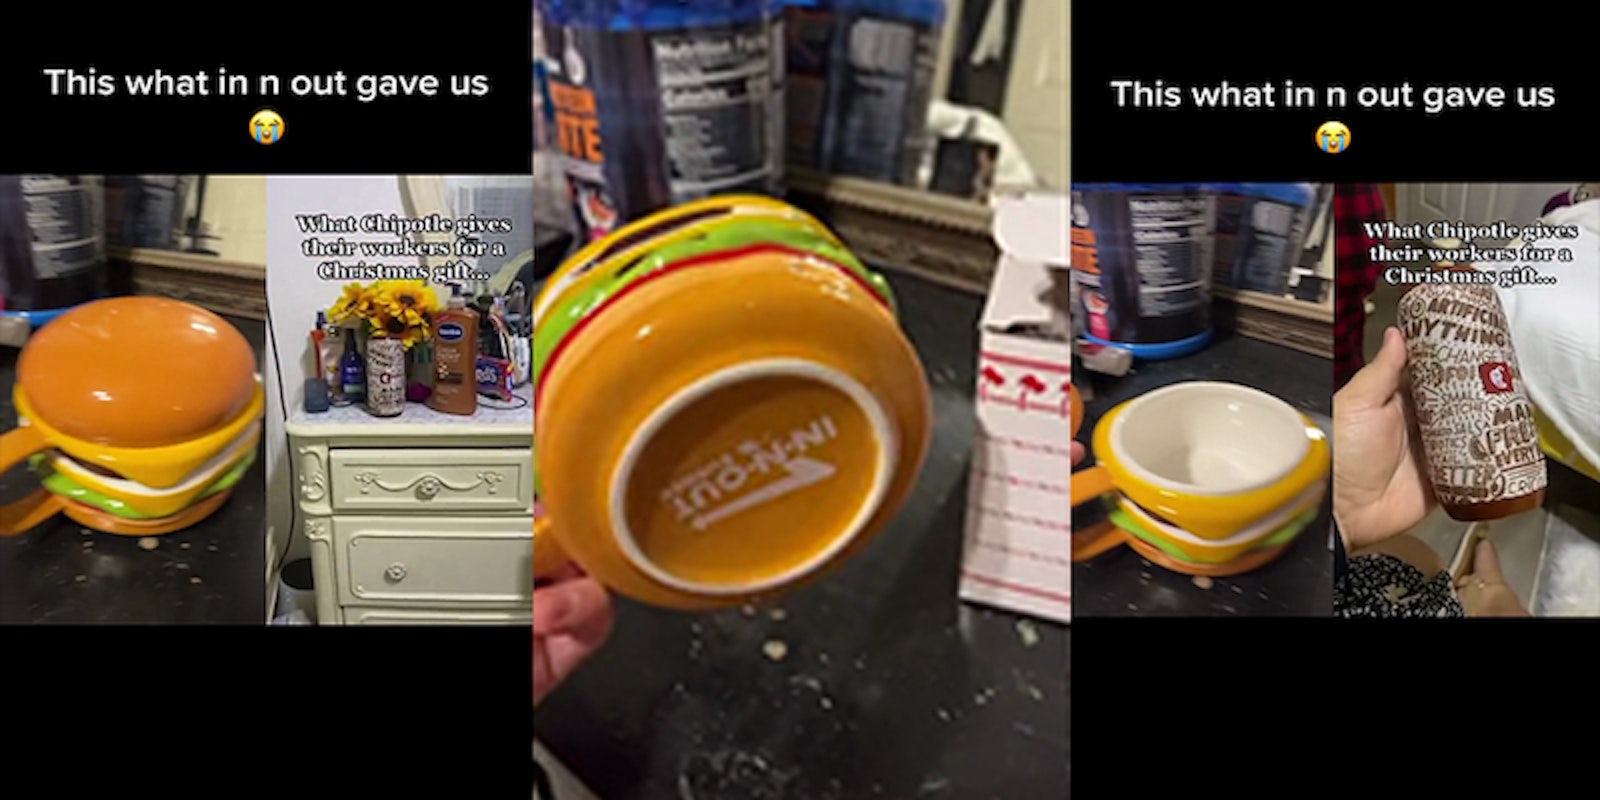 in-n-out ceramic hamburger mug, two images show a stitched tiktok video of a speaker that chipotle employees received for Christmas